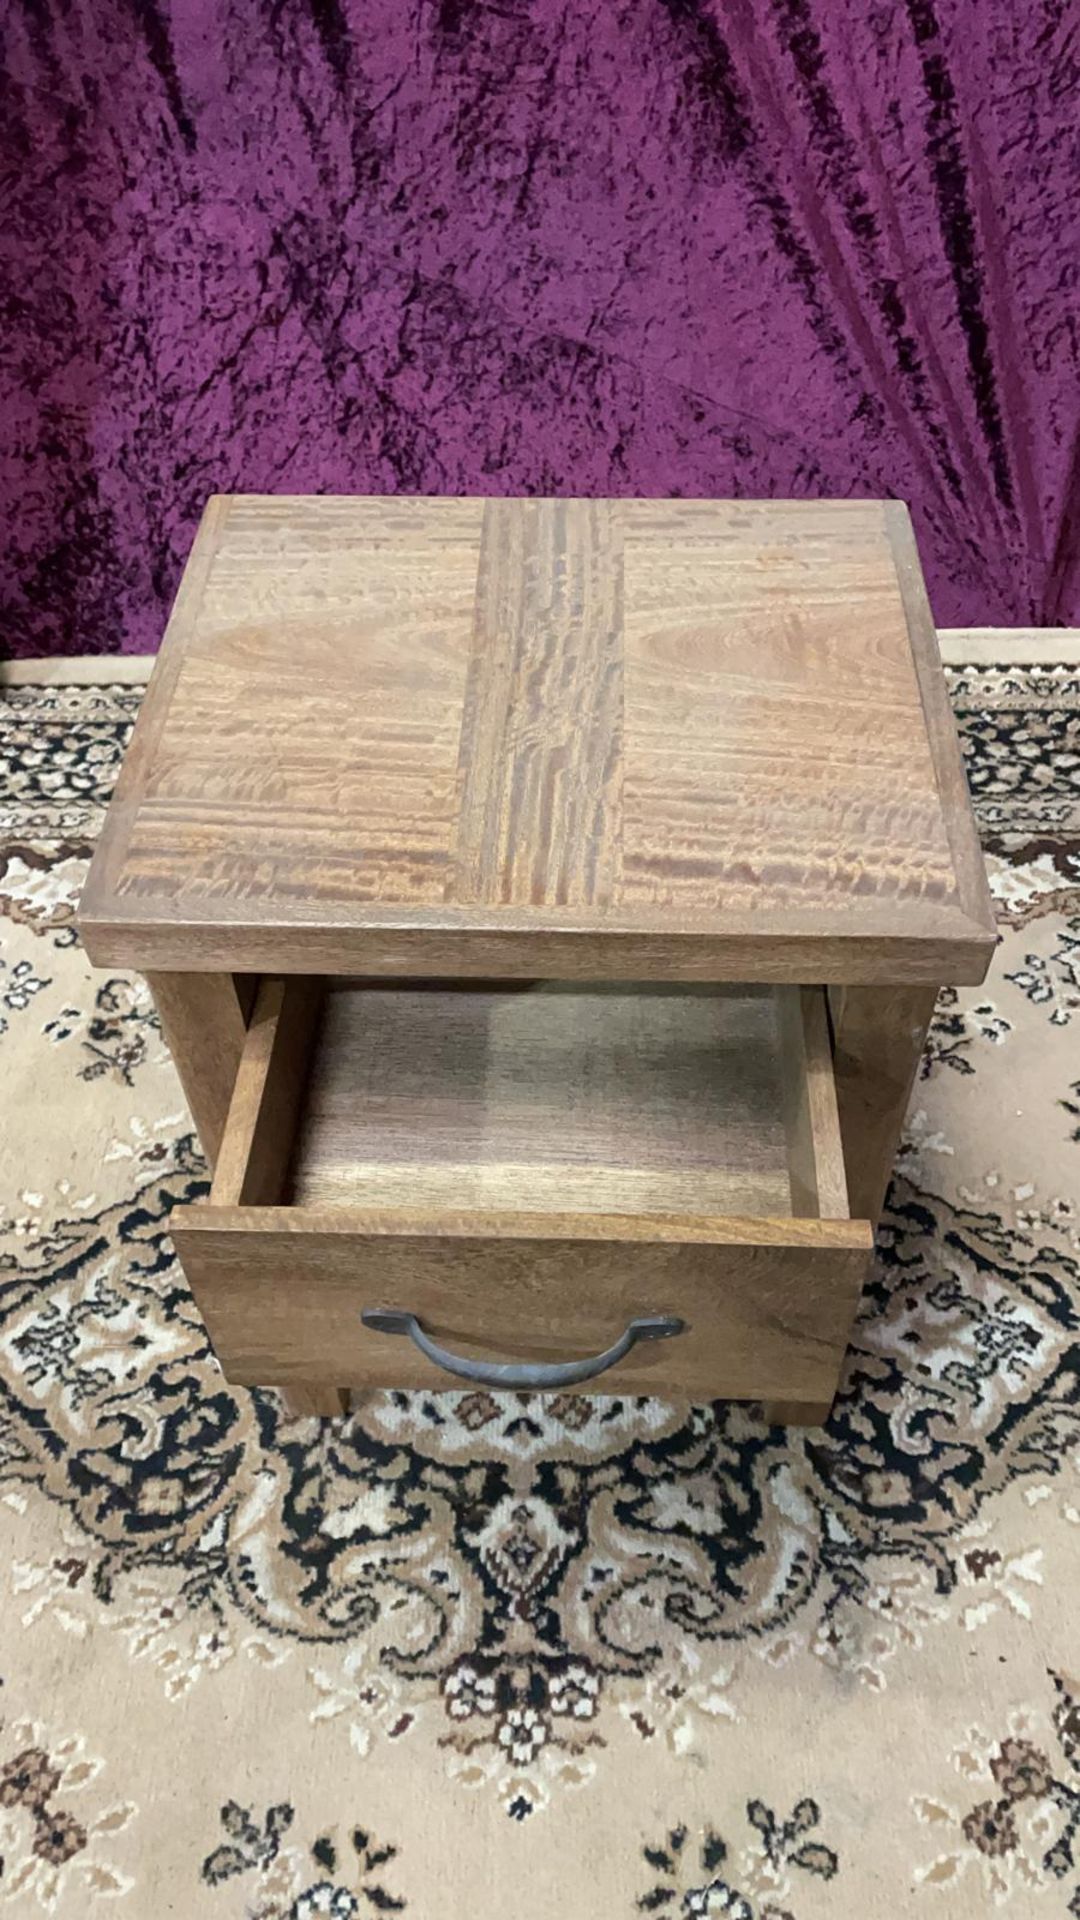 Oak rustic wood single drawer side table nightstand with slatted undershelf complete the - Image 3 of 3